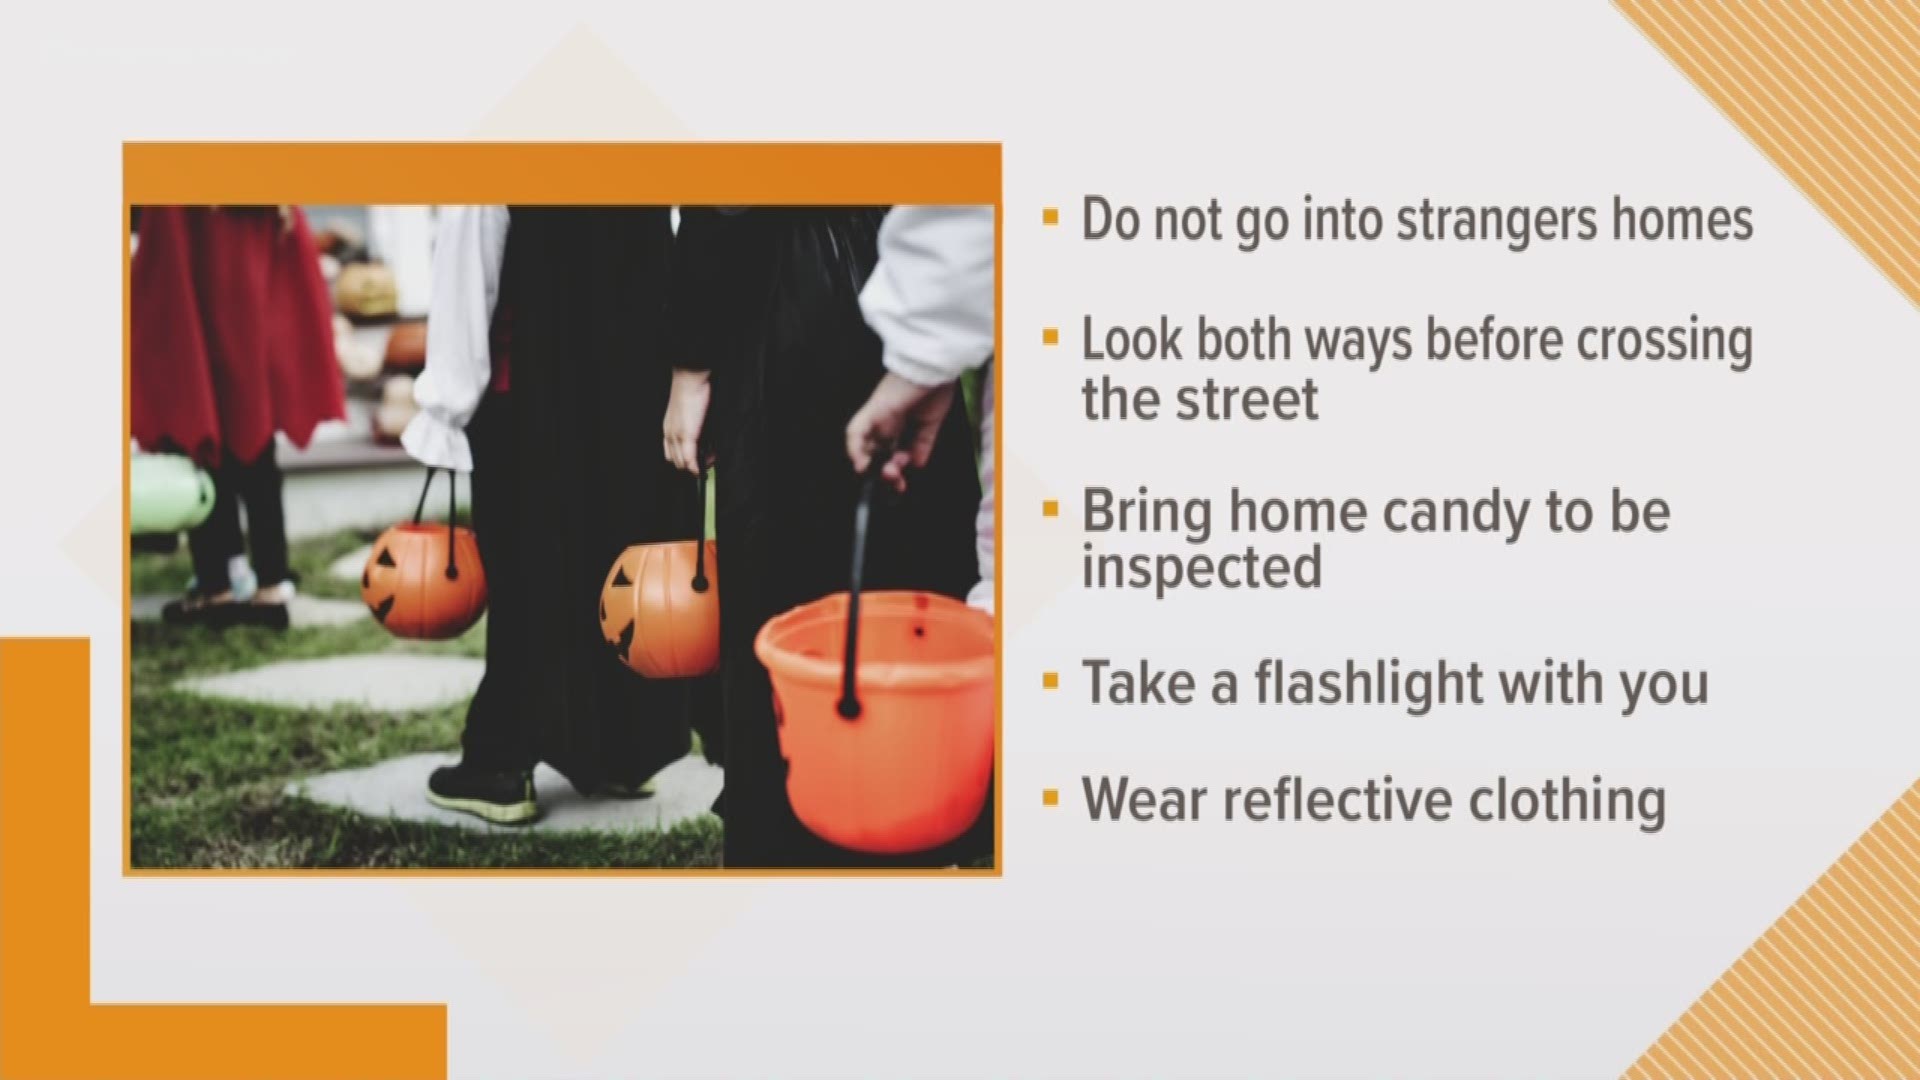 While Halloween is a fun holiday, there are some safety tips to keep in mind.